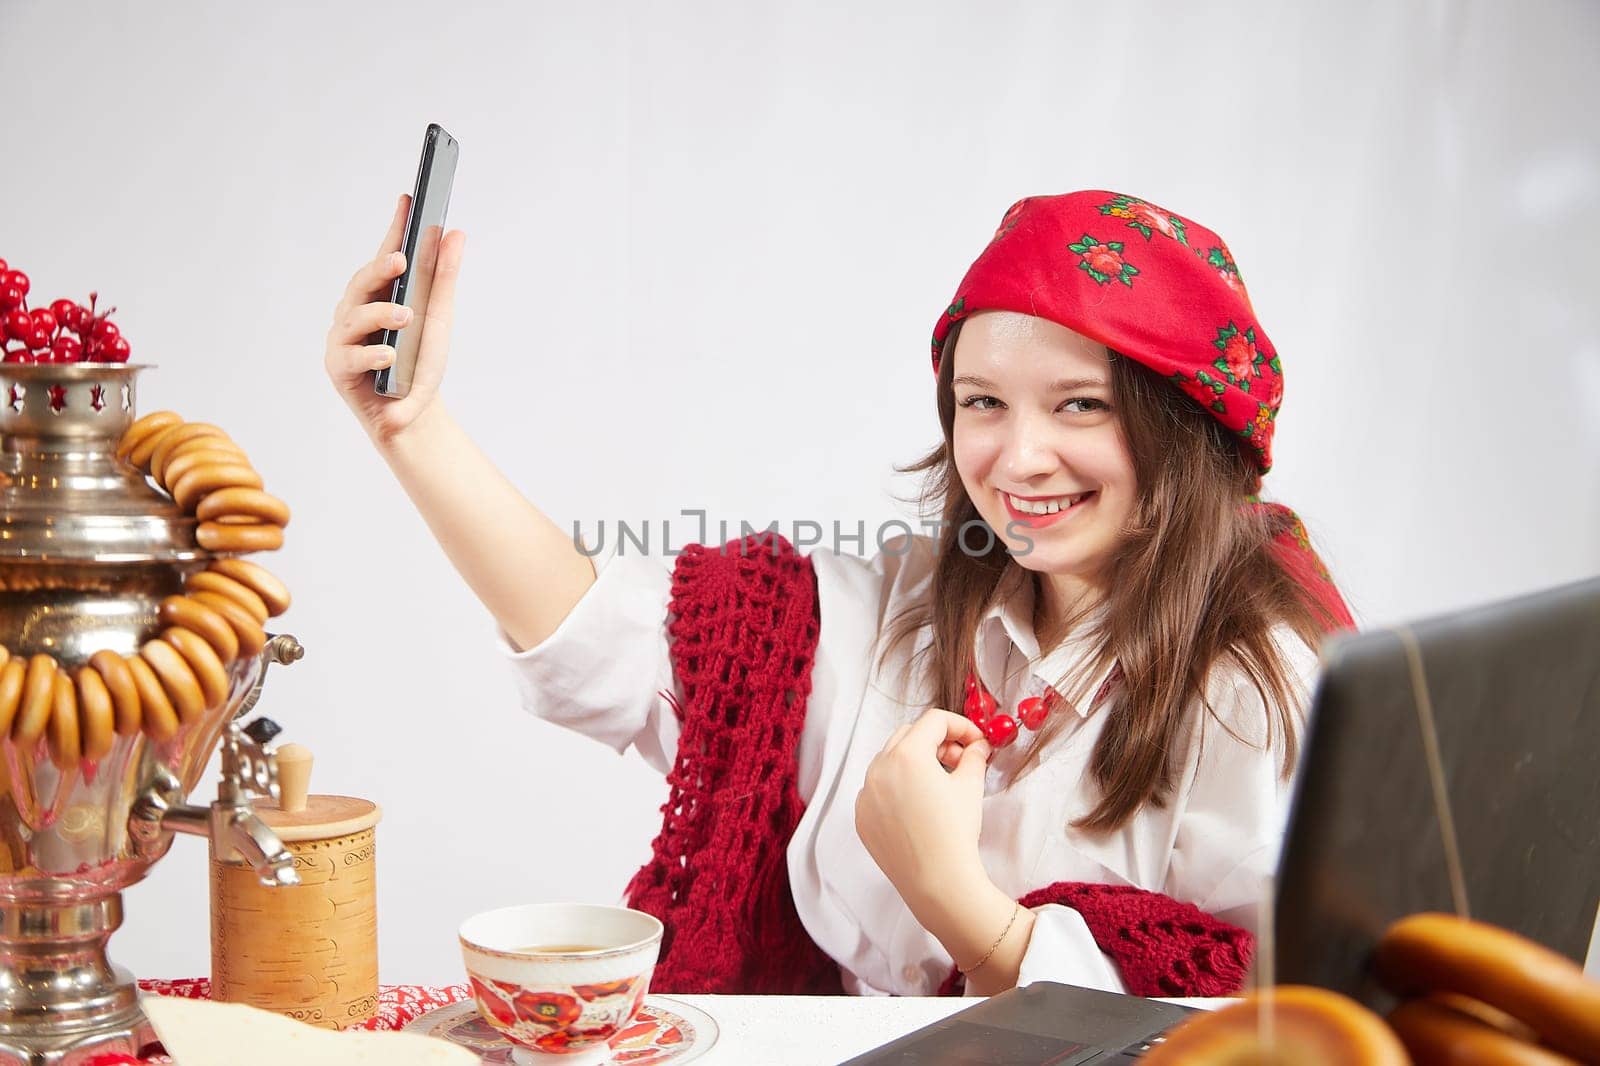 A fashionable modern girl in stylized folk clothes at table with a samovar, bagels and tea takes a selfie on the Orthodox holiday of Maslenitsa and Easter. Funny photo shoot for a young woman